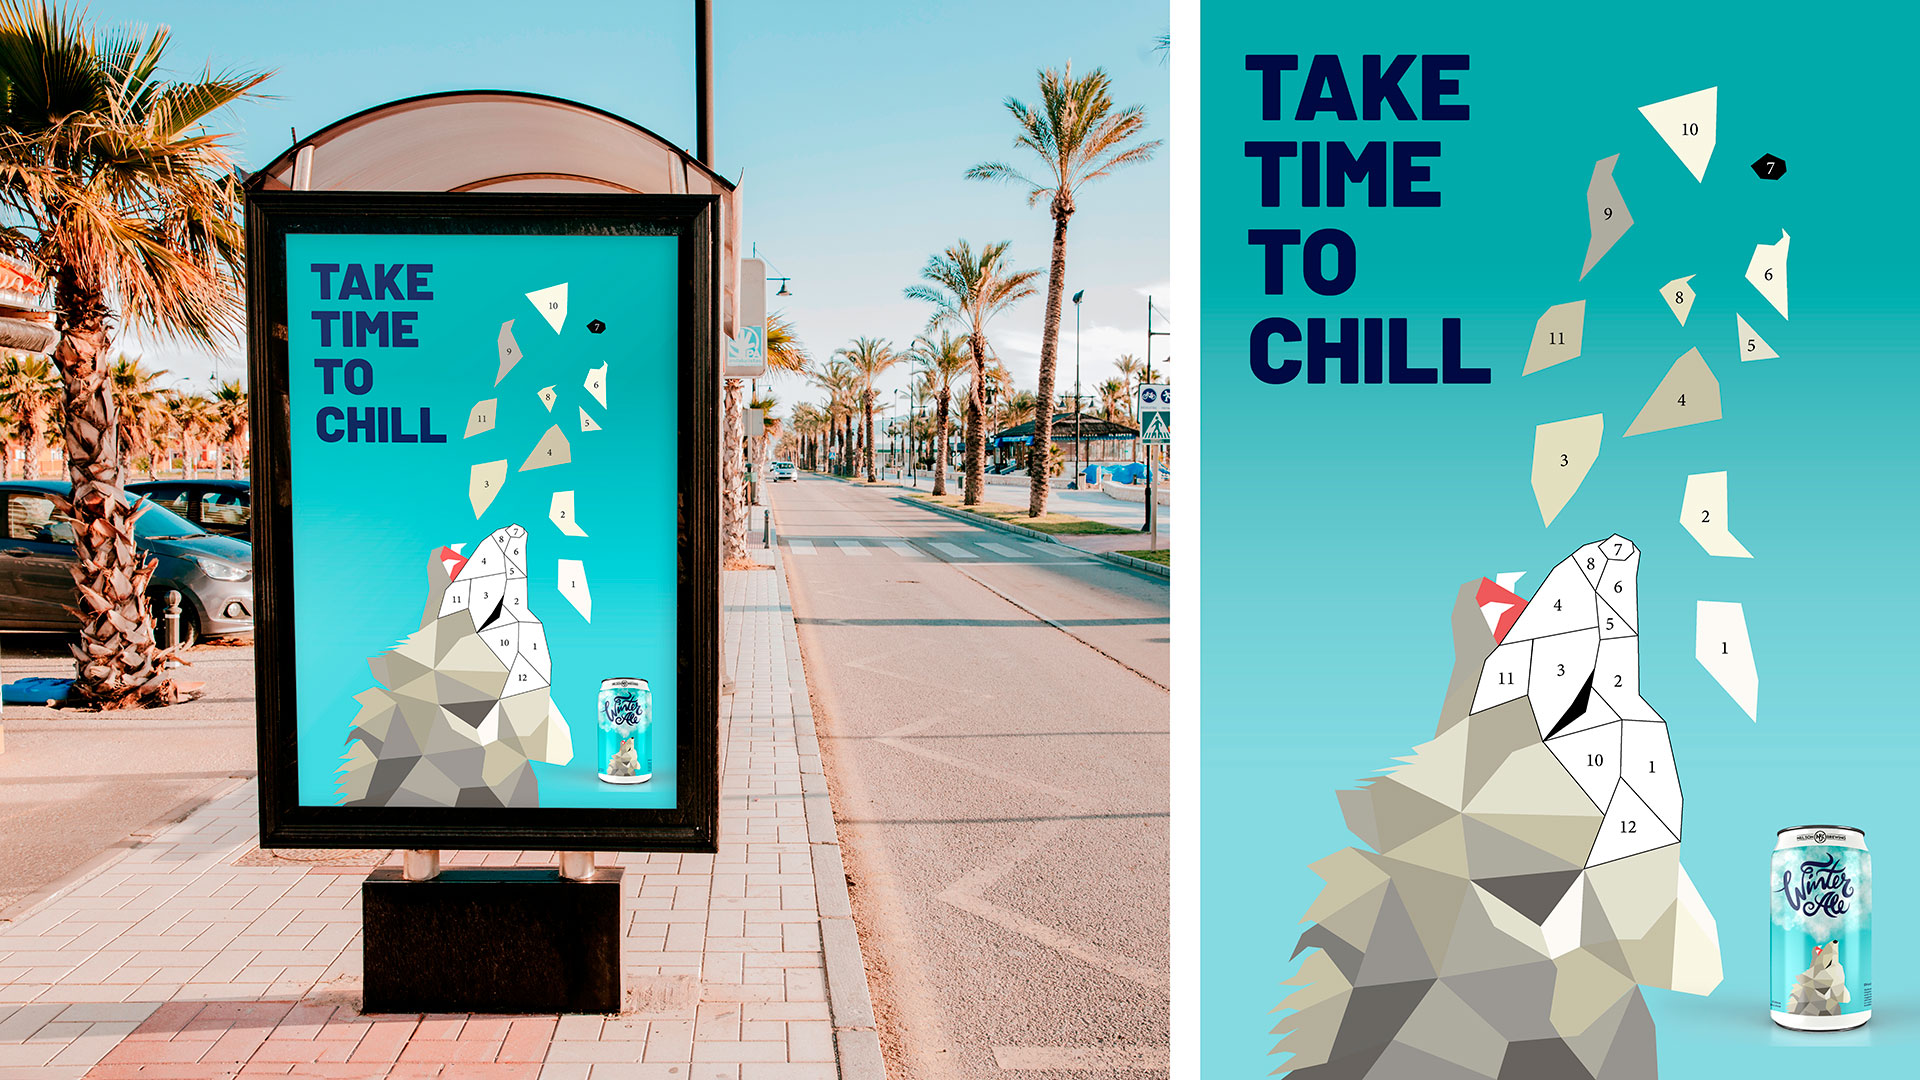 Mocked up bus shelter ad poster with puzzle.